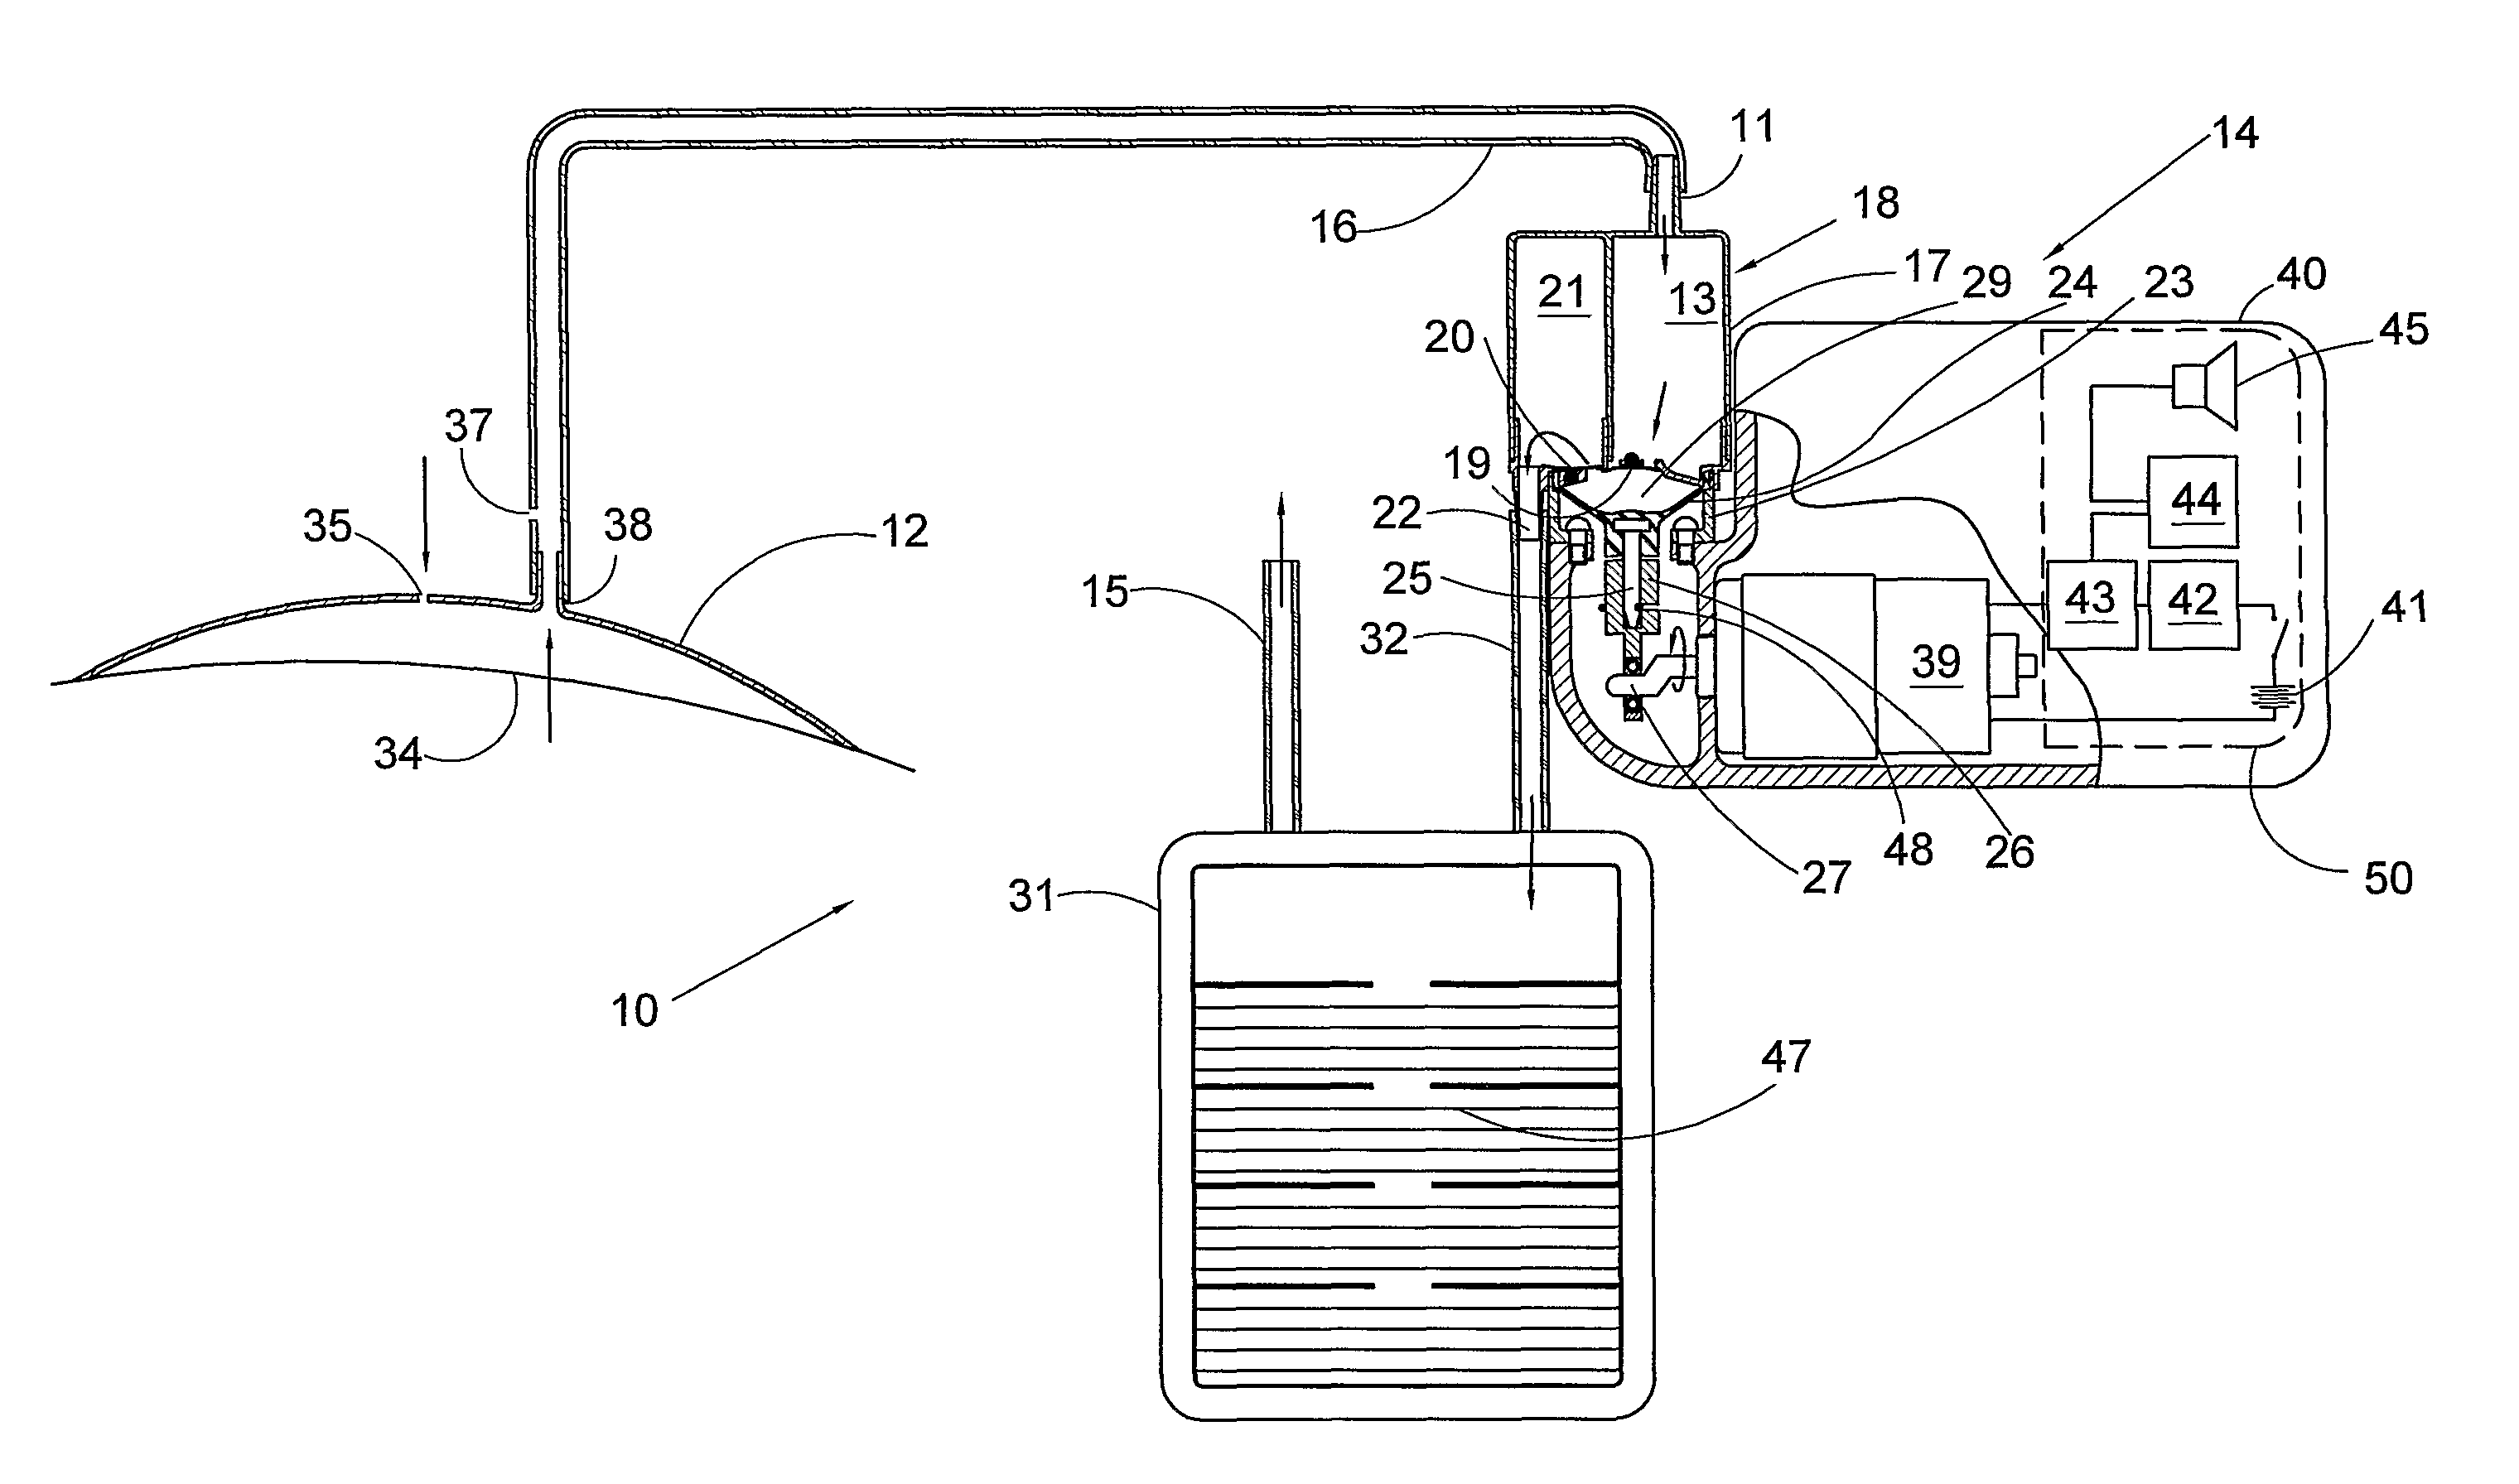 Wound closure and drainage system